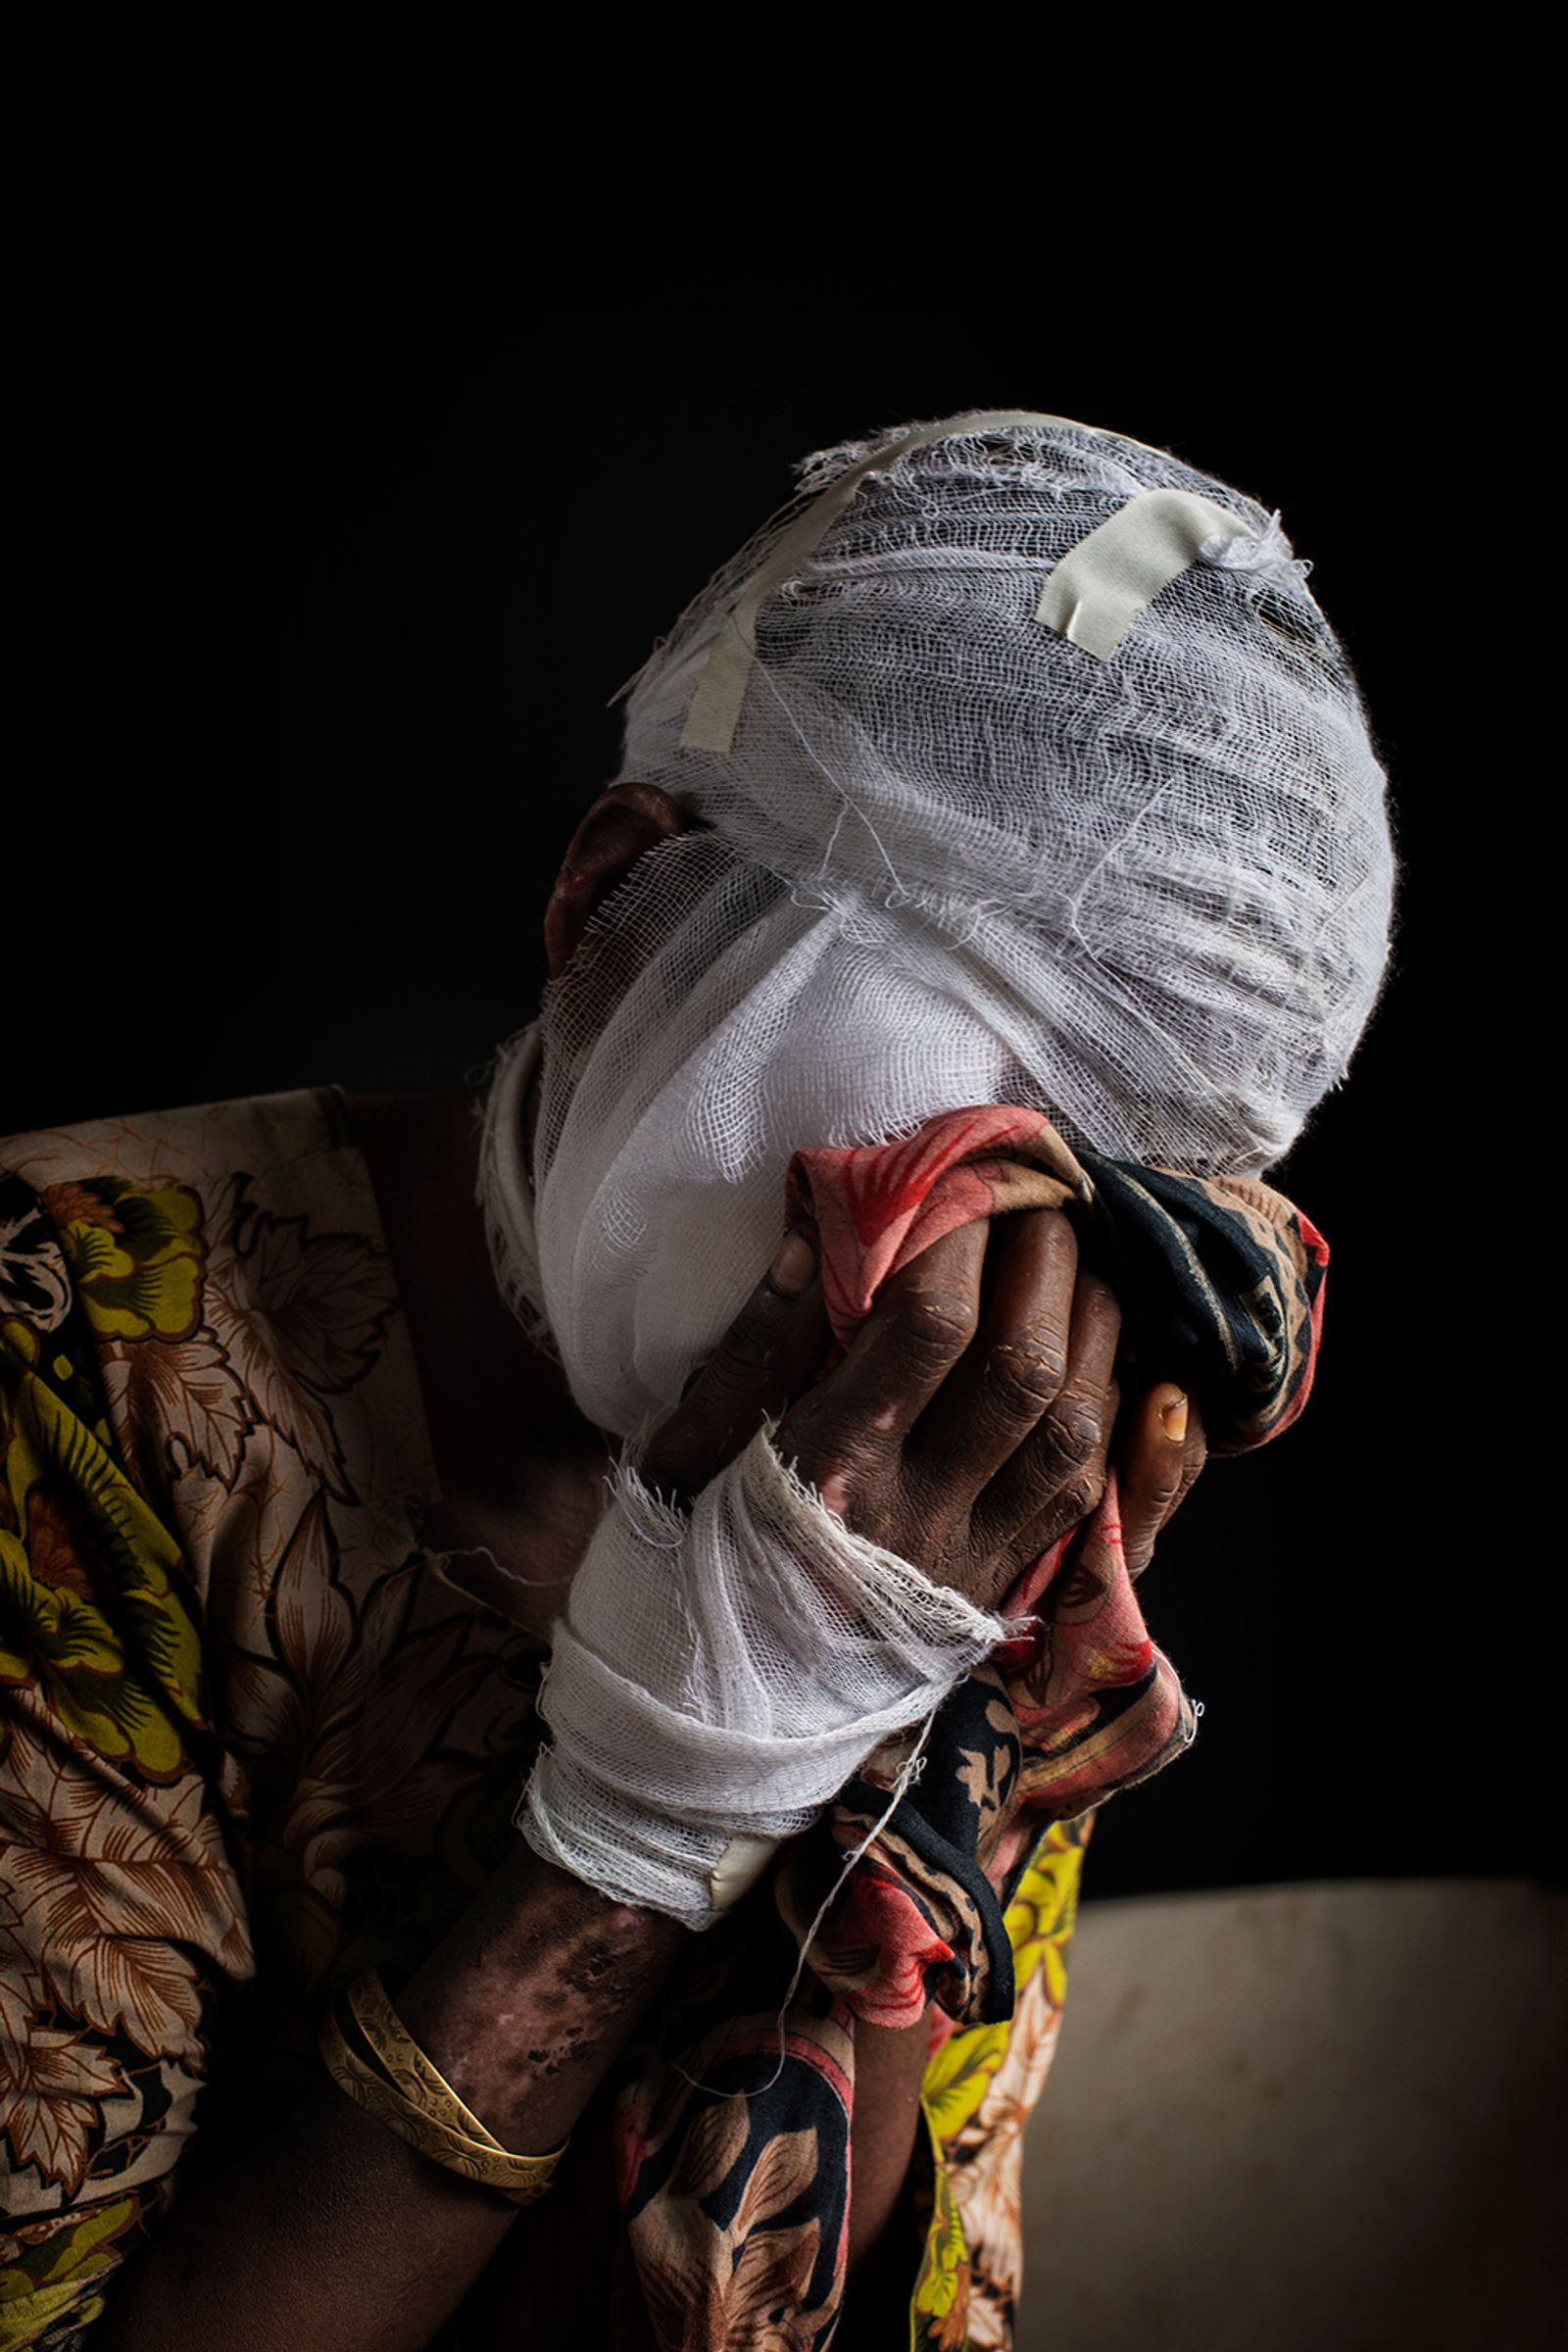 © Anastasia Taylor Lind - Image from the Rohingya Massacre survivors photography project